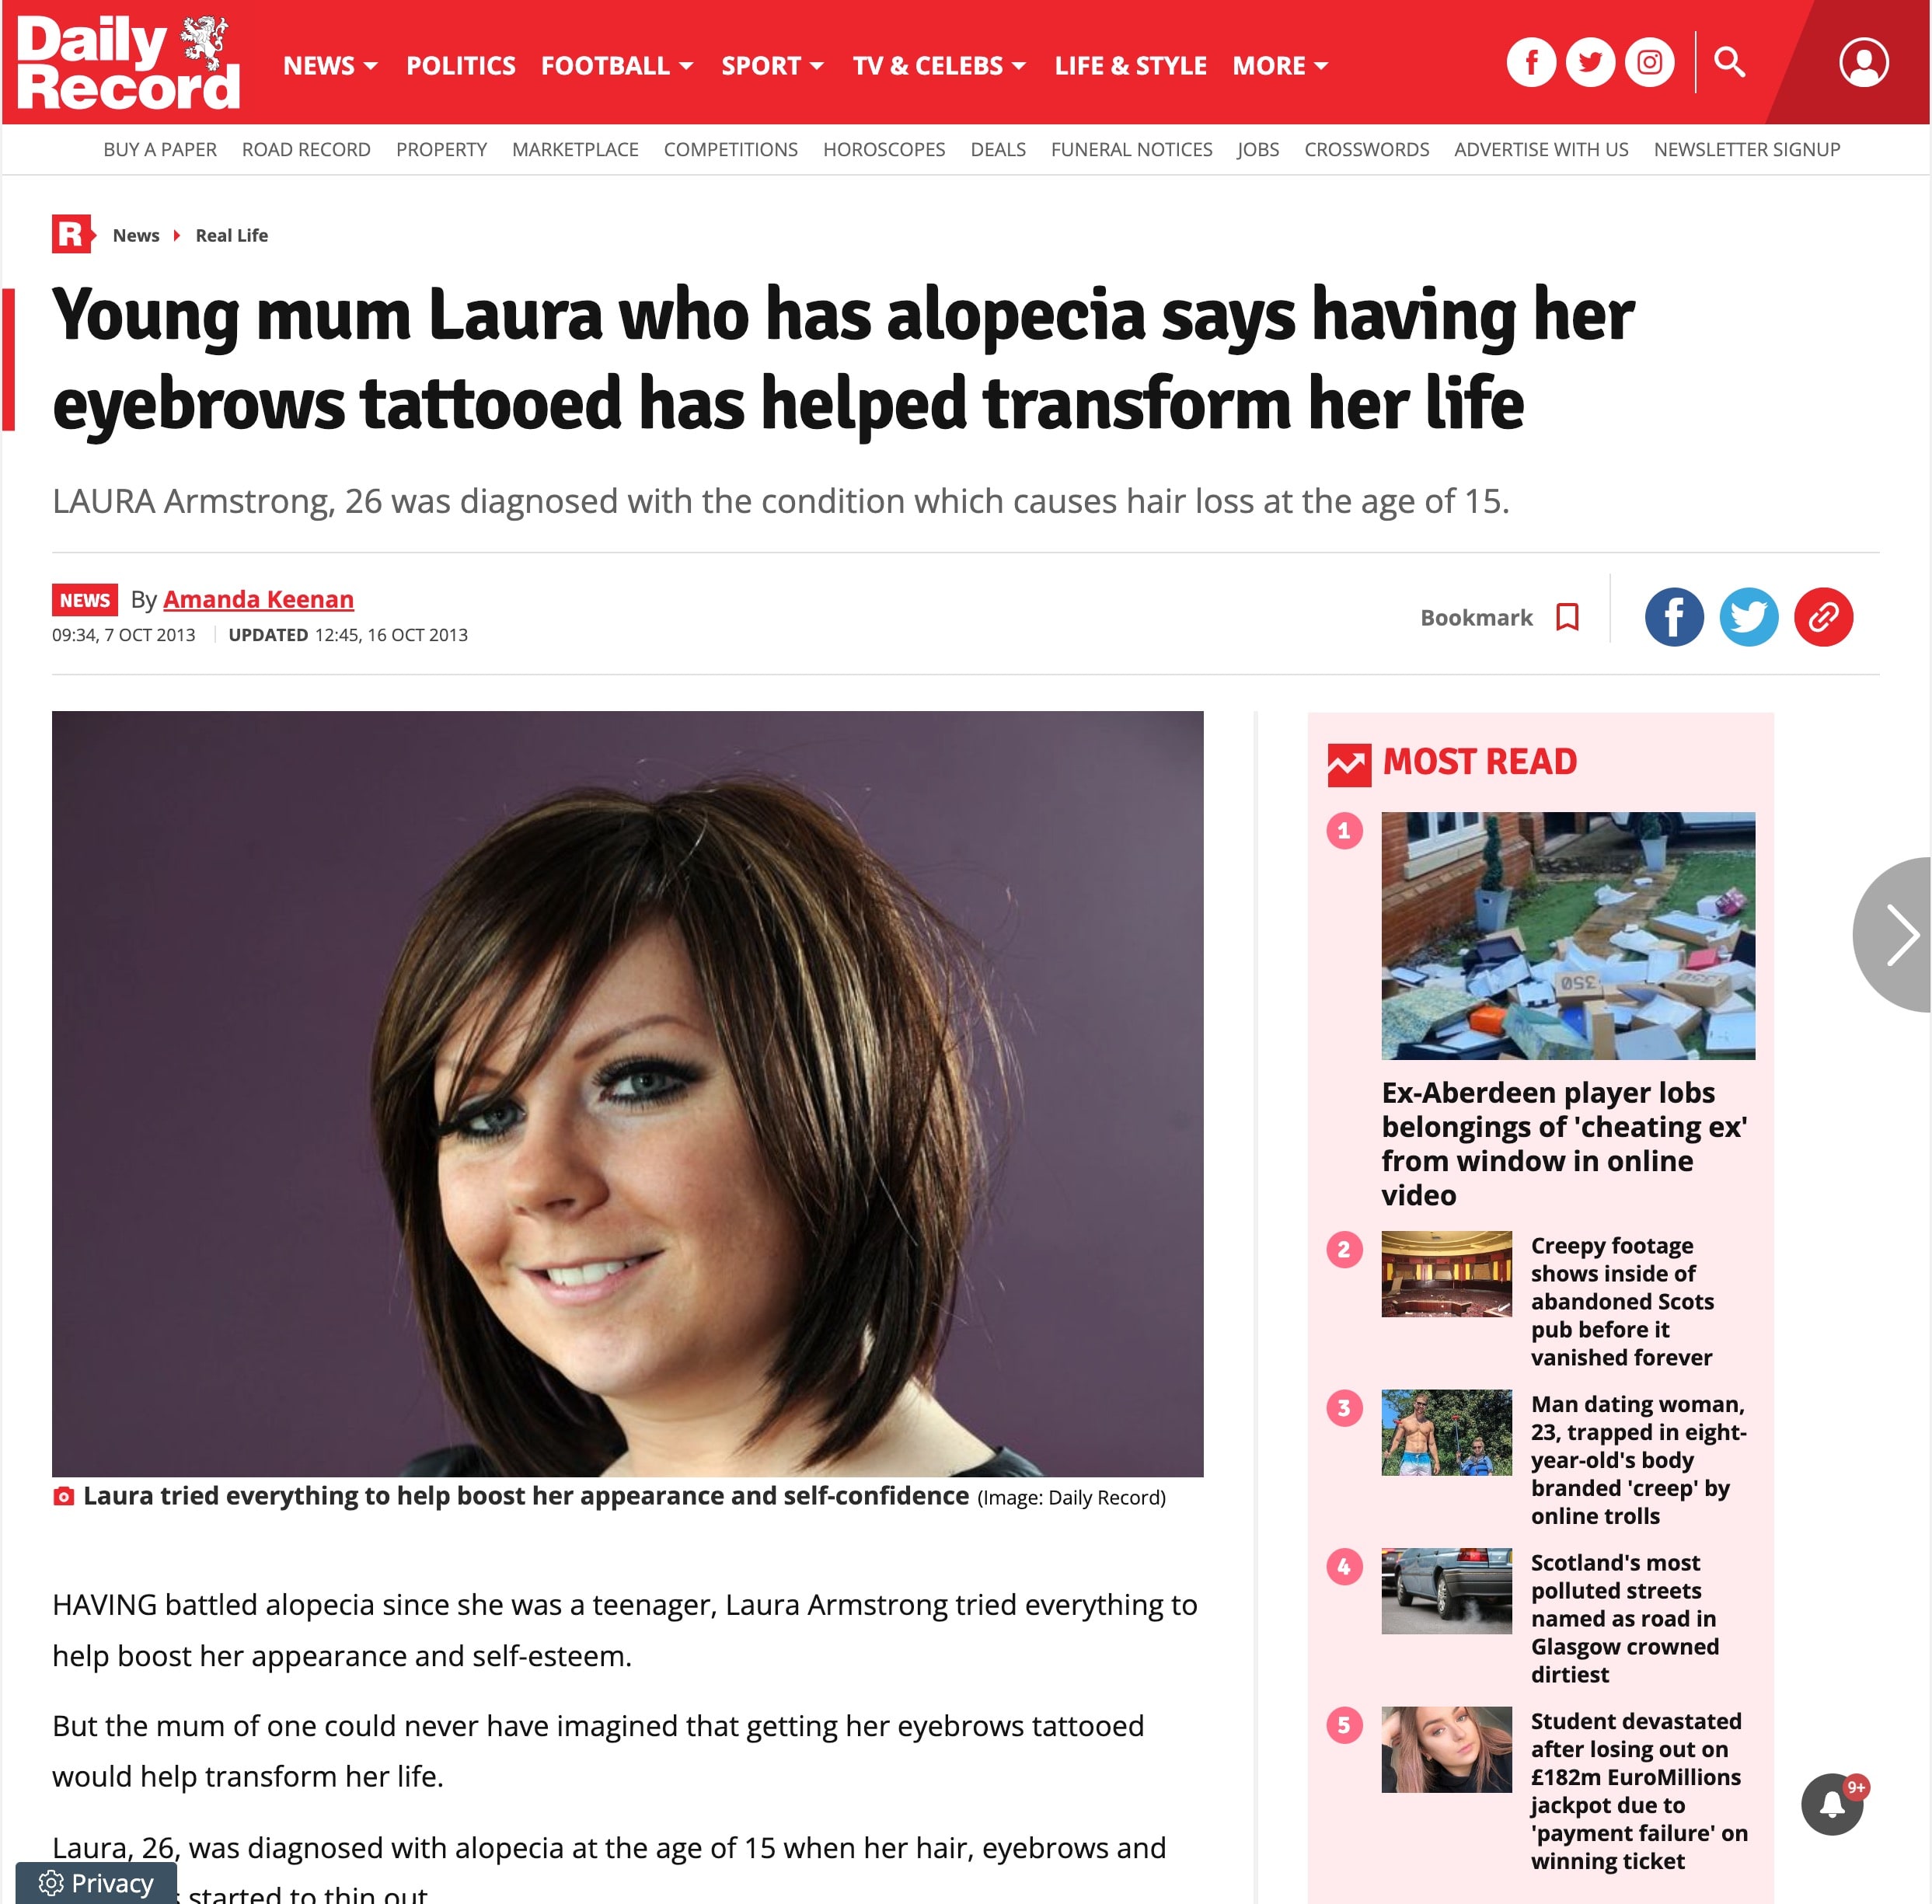 Screenshot of website article about Laura Armstrong